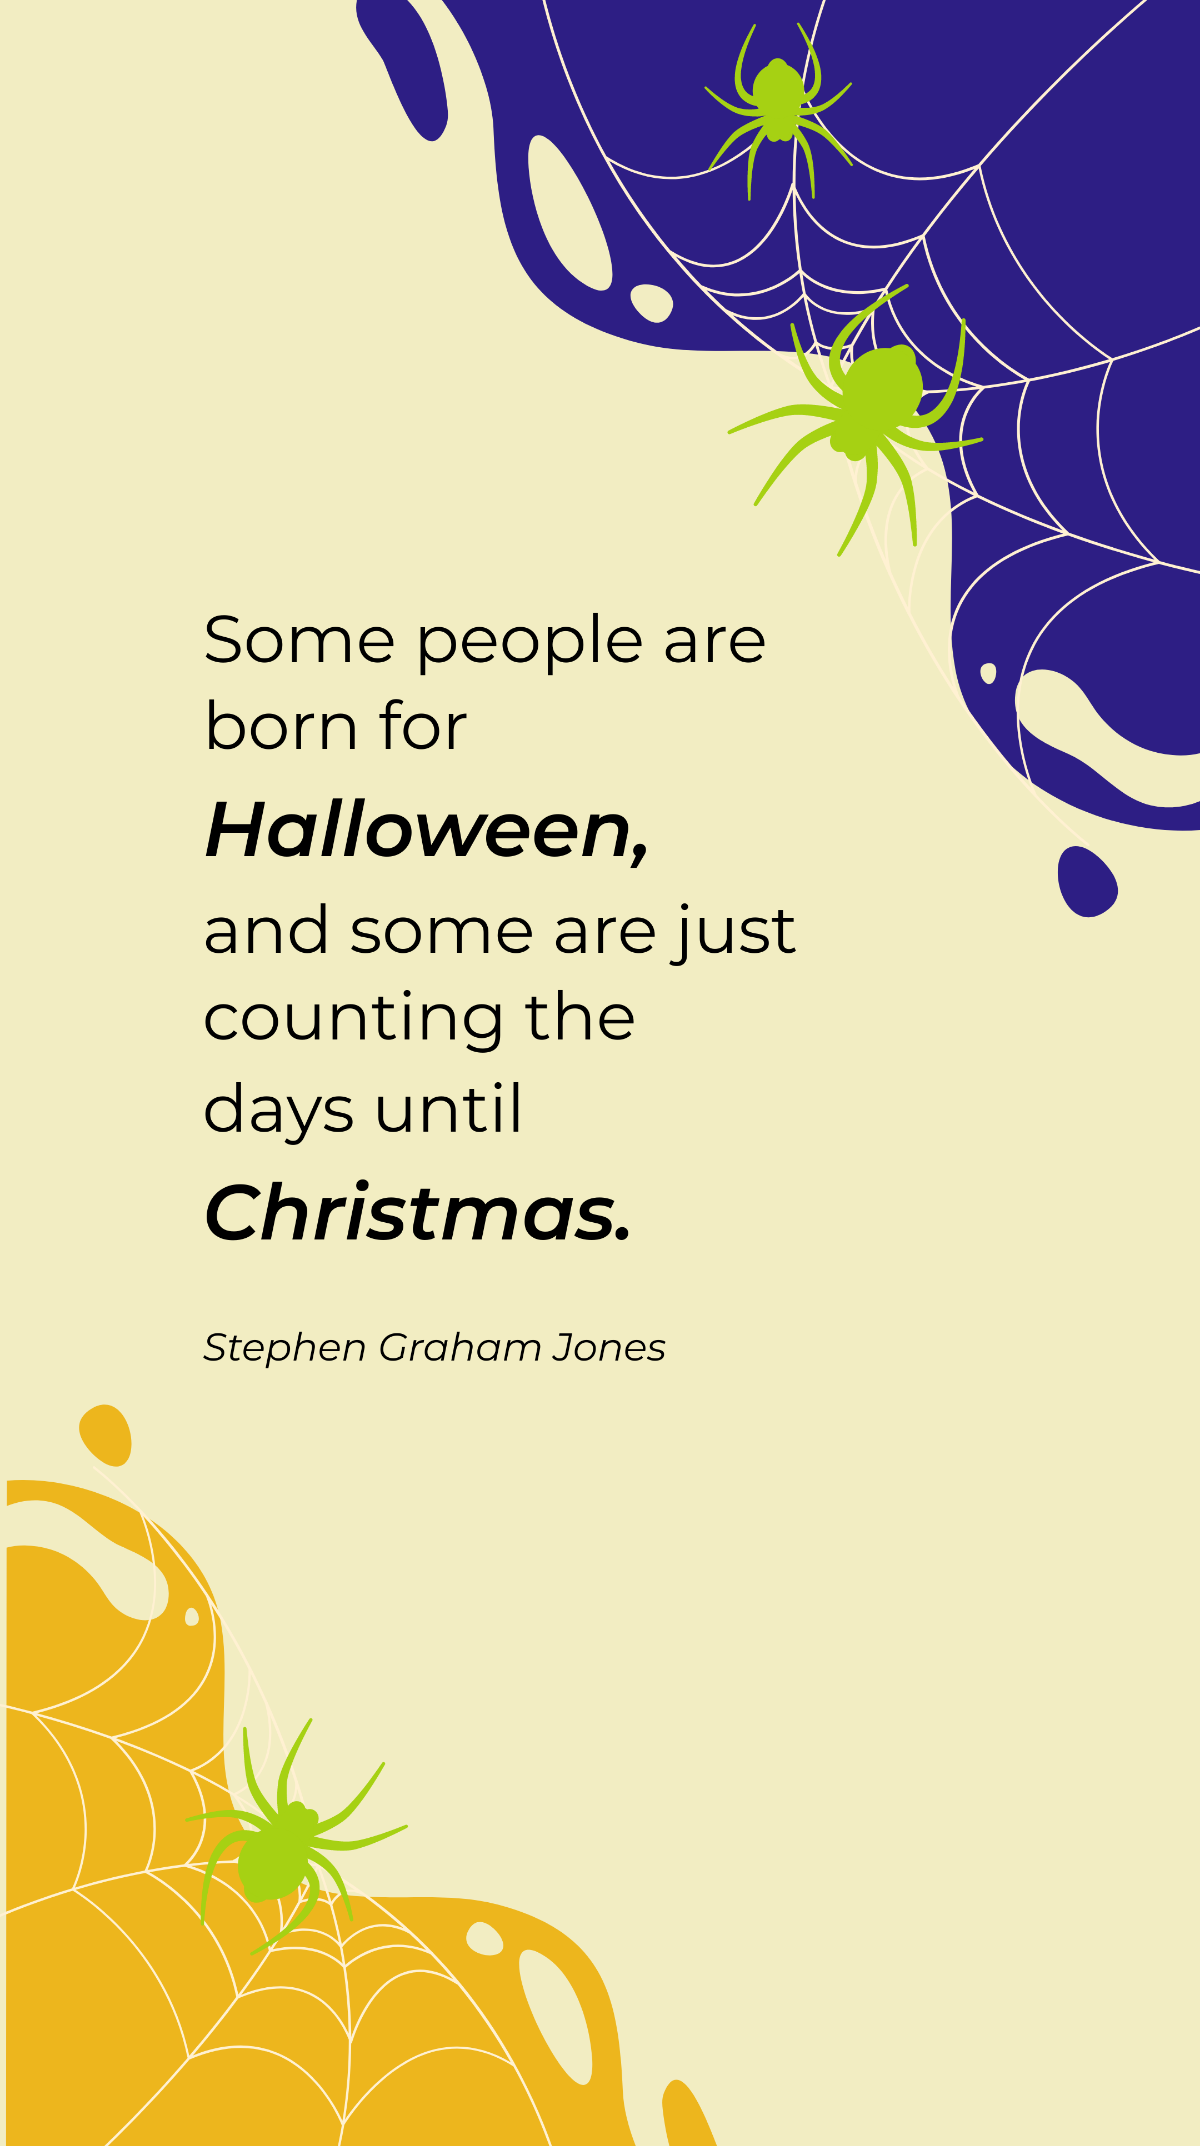  Stephen Graham Jones-Some people are born for Halloween, and some are just counting the days until Christmas.  Template